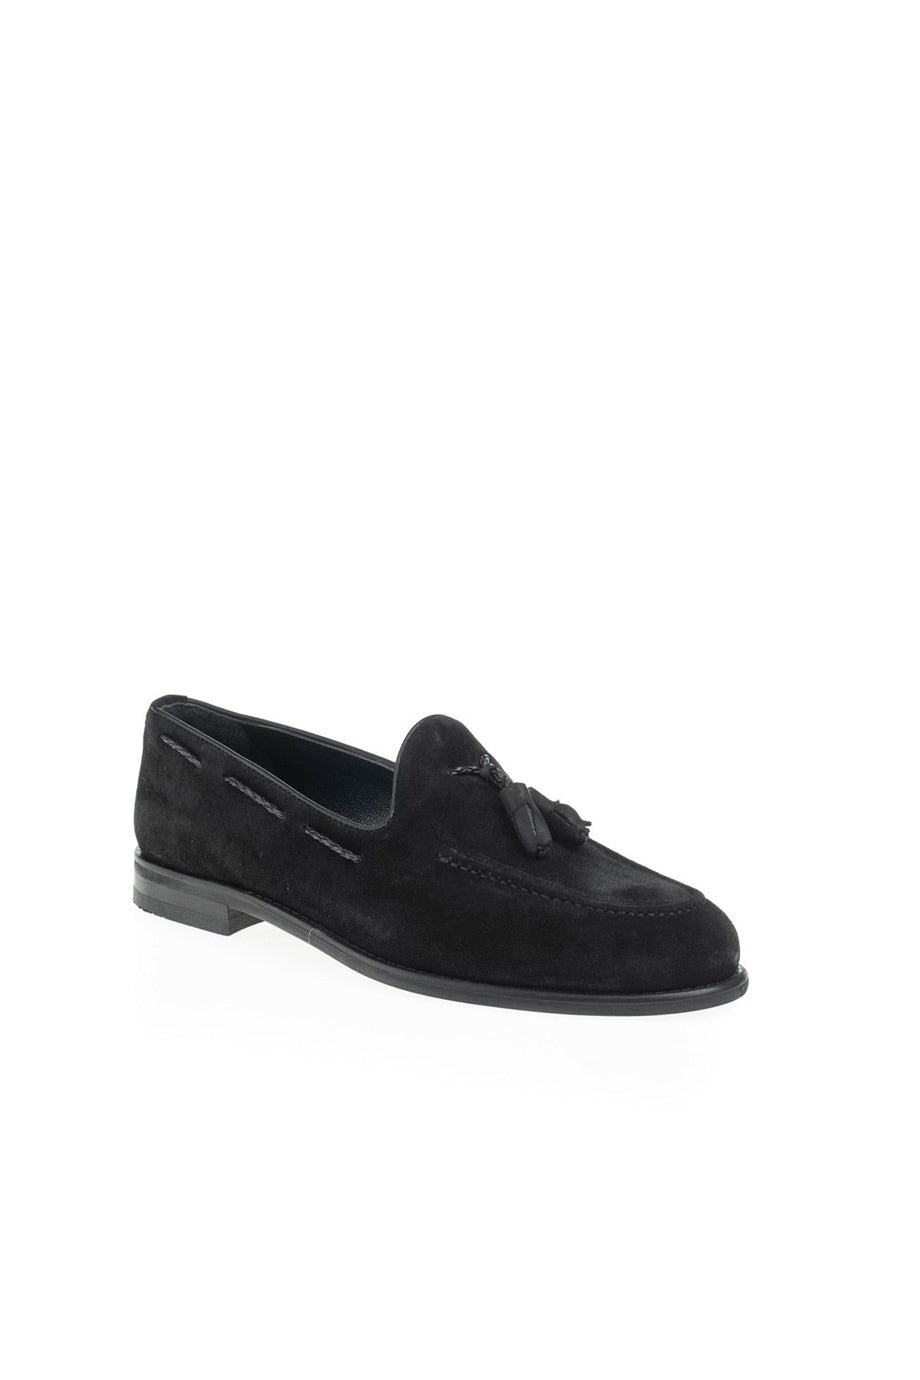 Special Edition MenStyleWith Suede Black Loafers